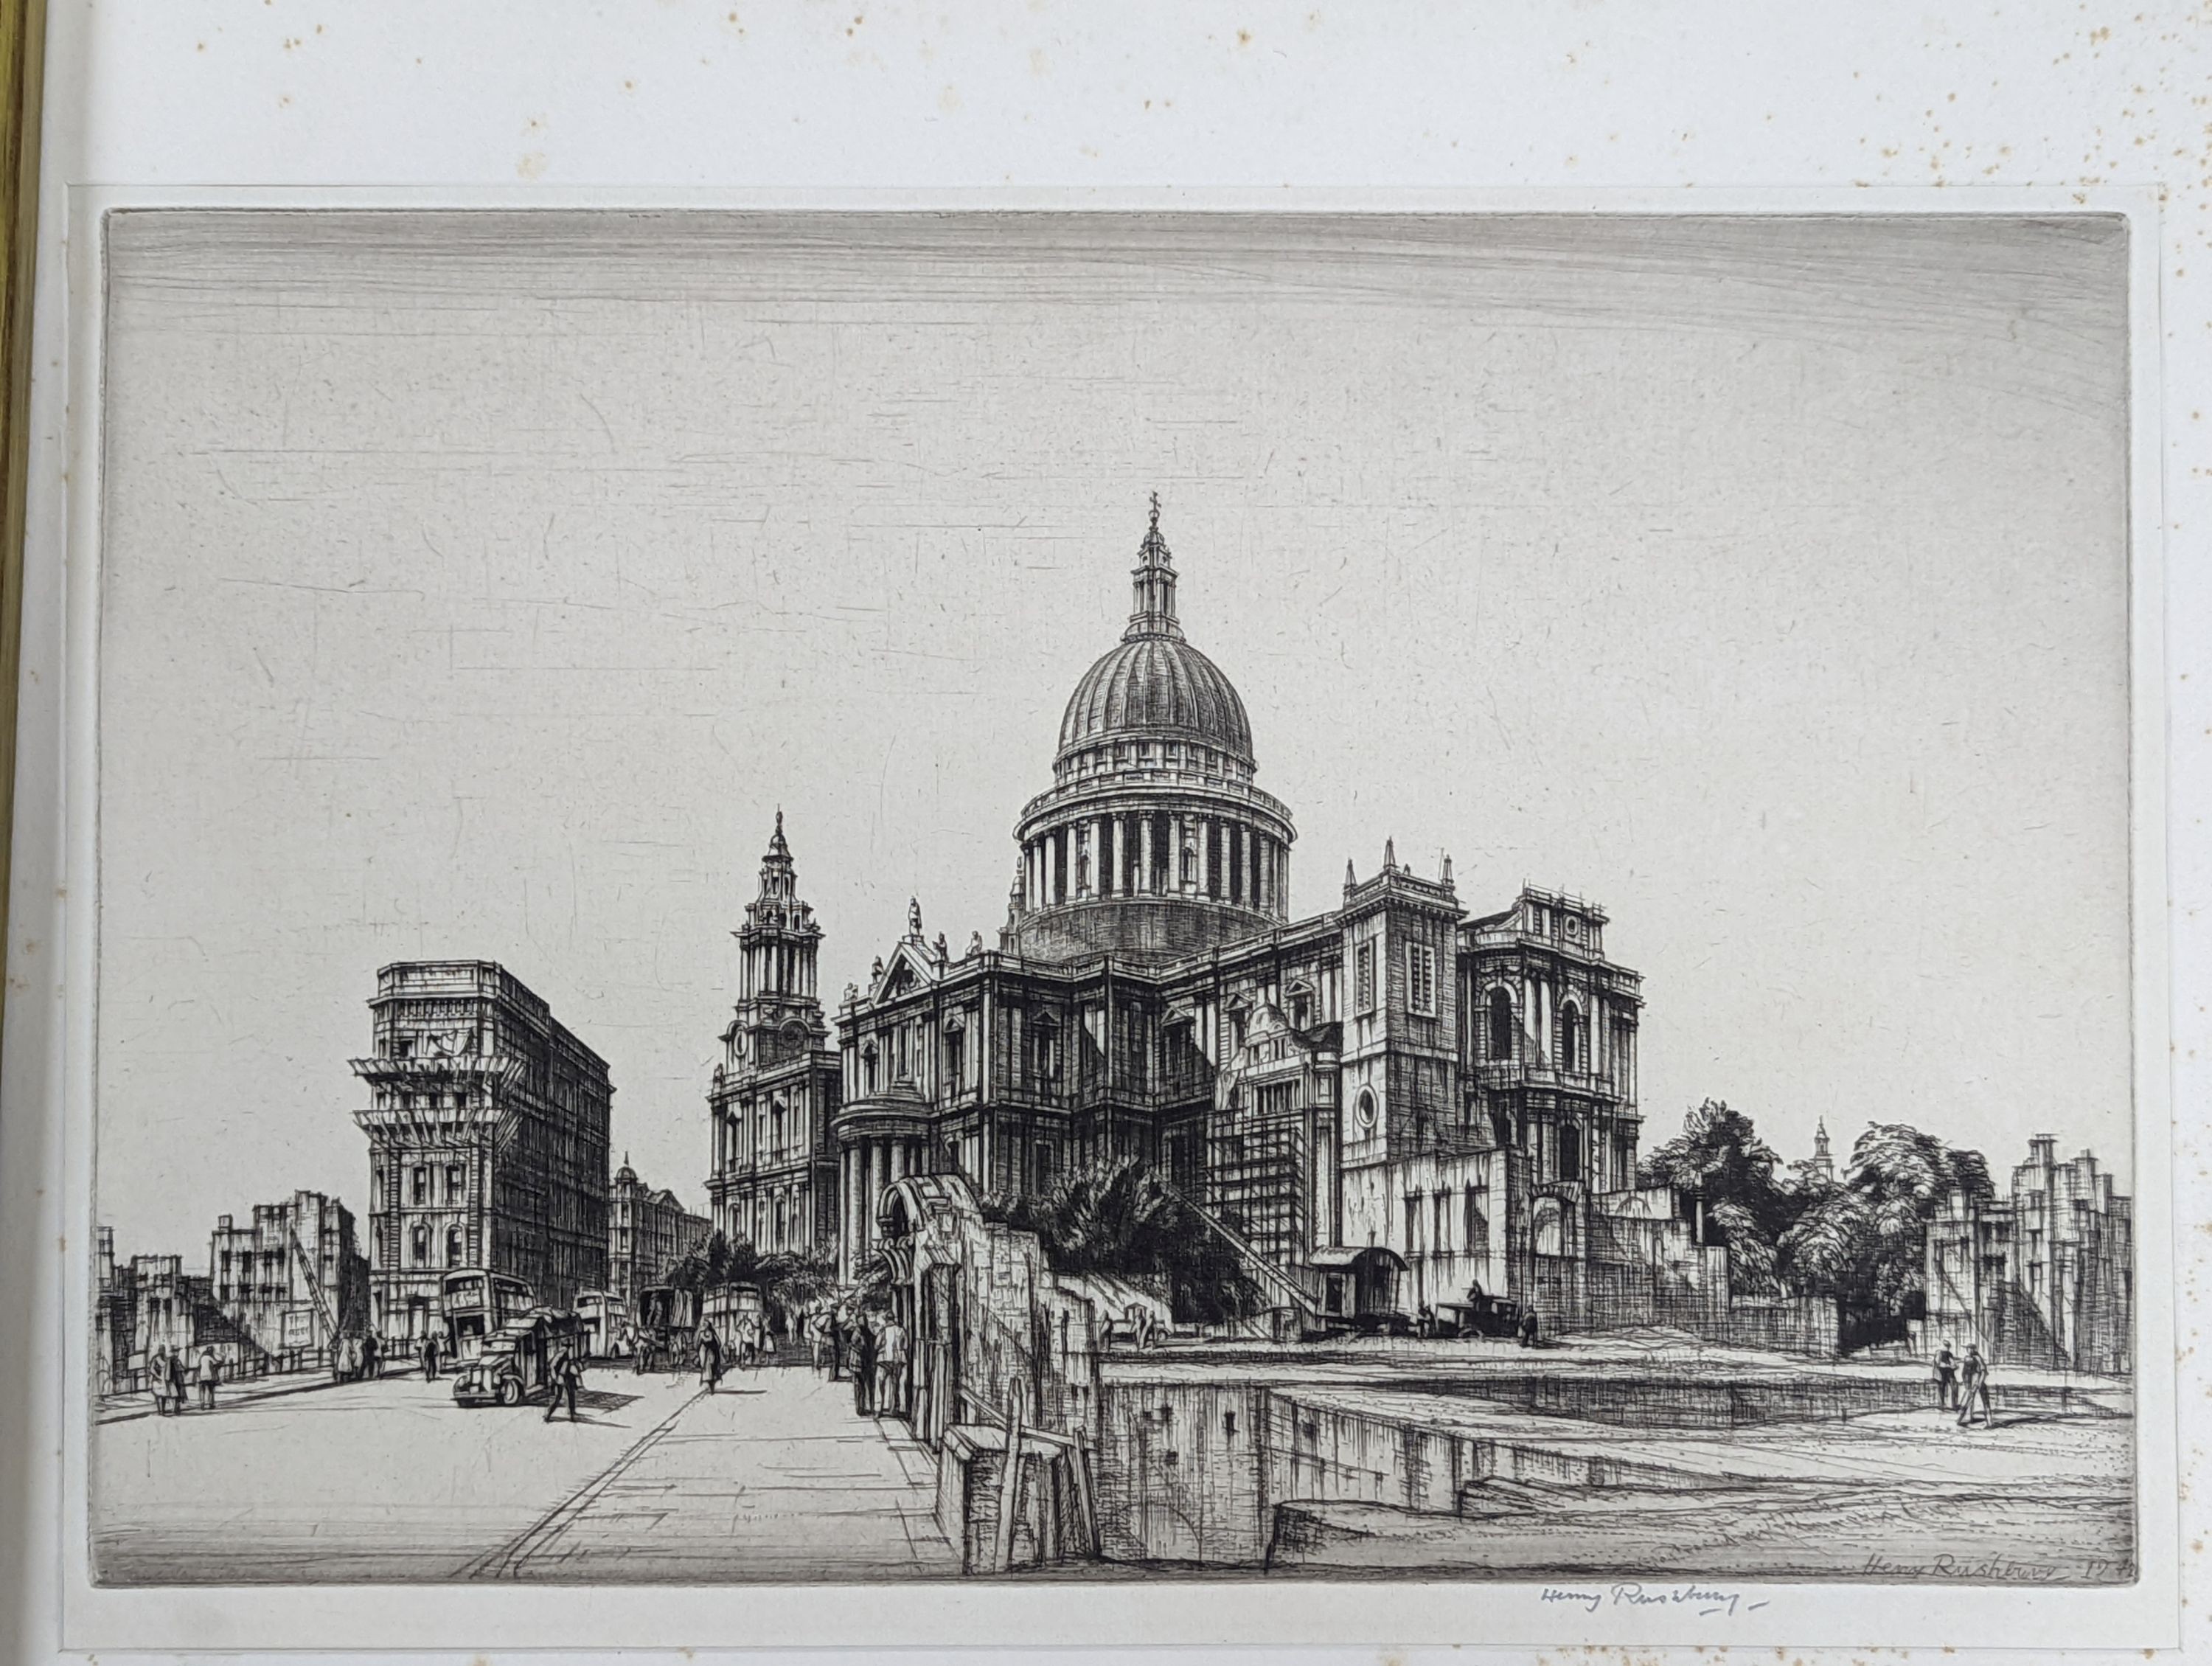 Sir Henry Rushbury RA (1889-1968), dry point etching, View of St Paul's during the Blitz, signed in pencil and dated 1942 in the plate, 25 x 37cm, unframed